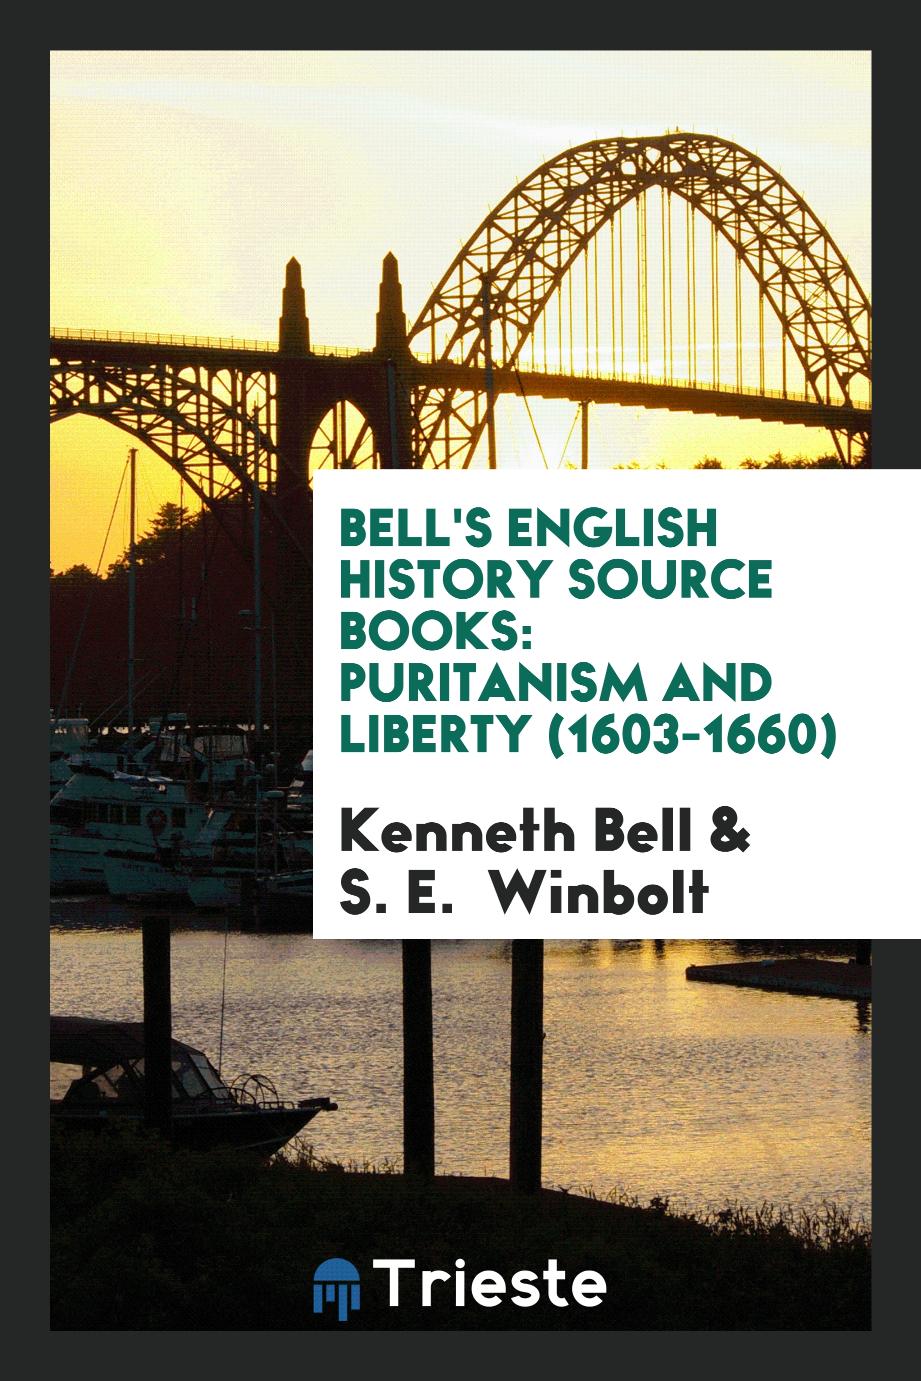 Bell's English History Source Books: Puritanism and Liberty (1603-1660)